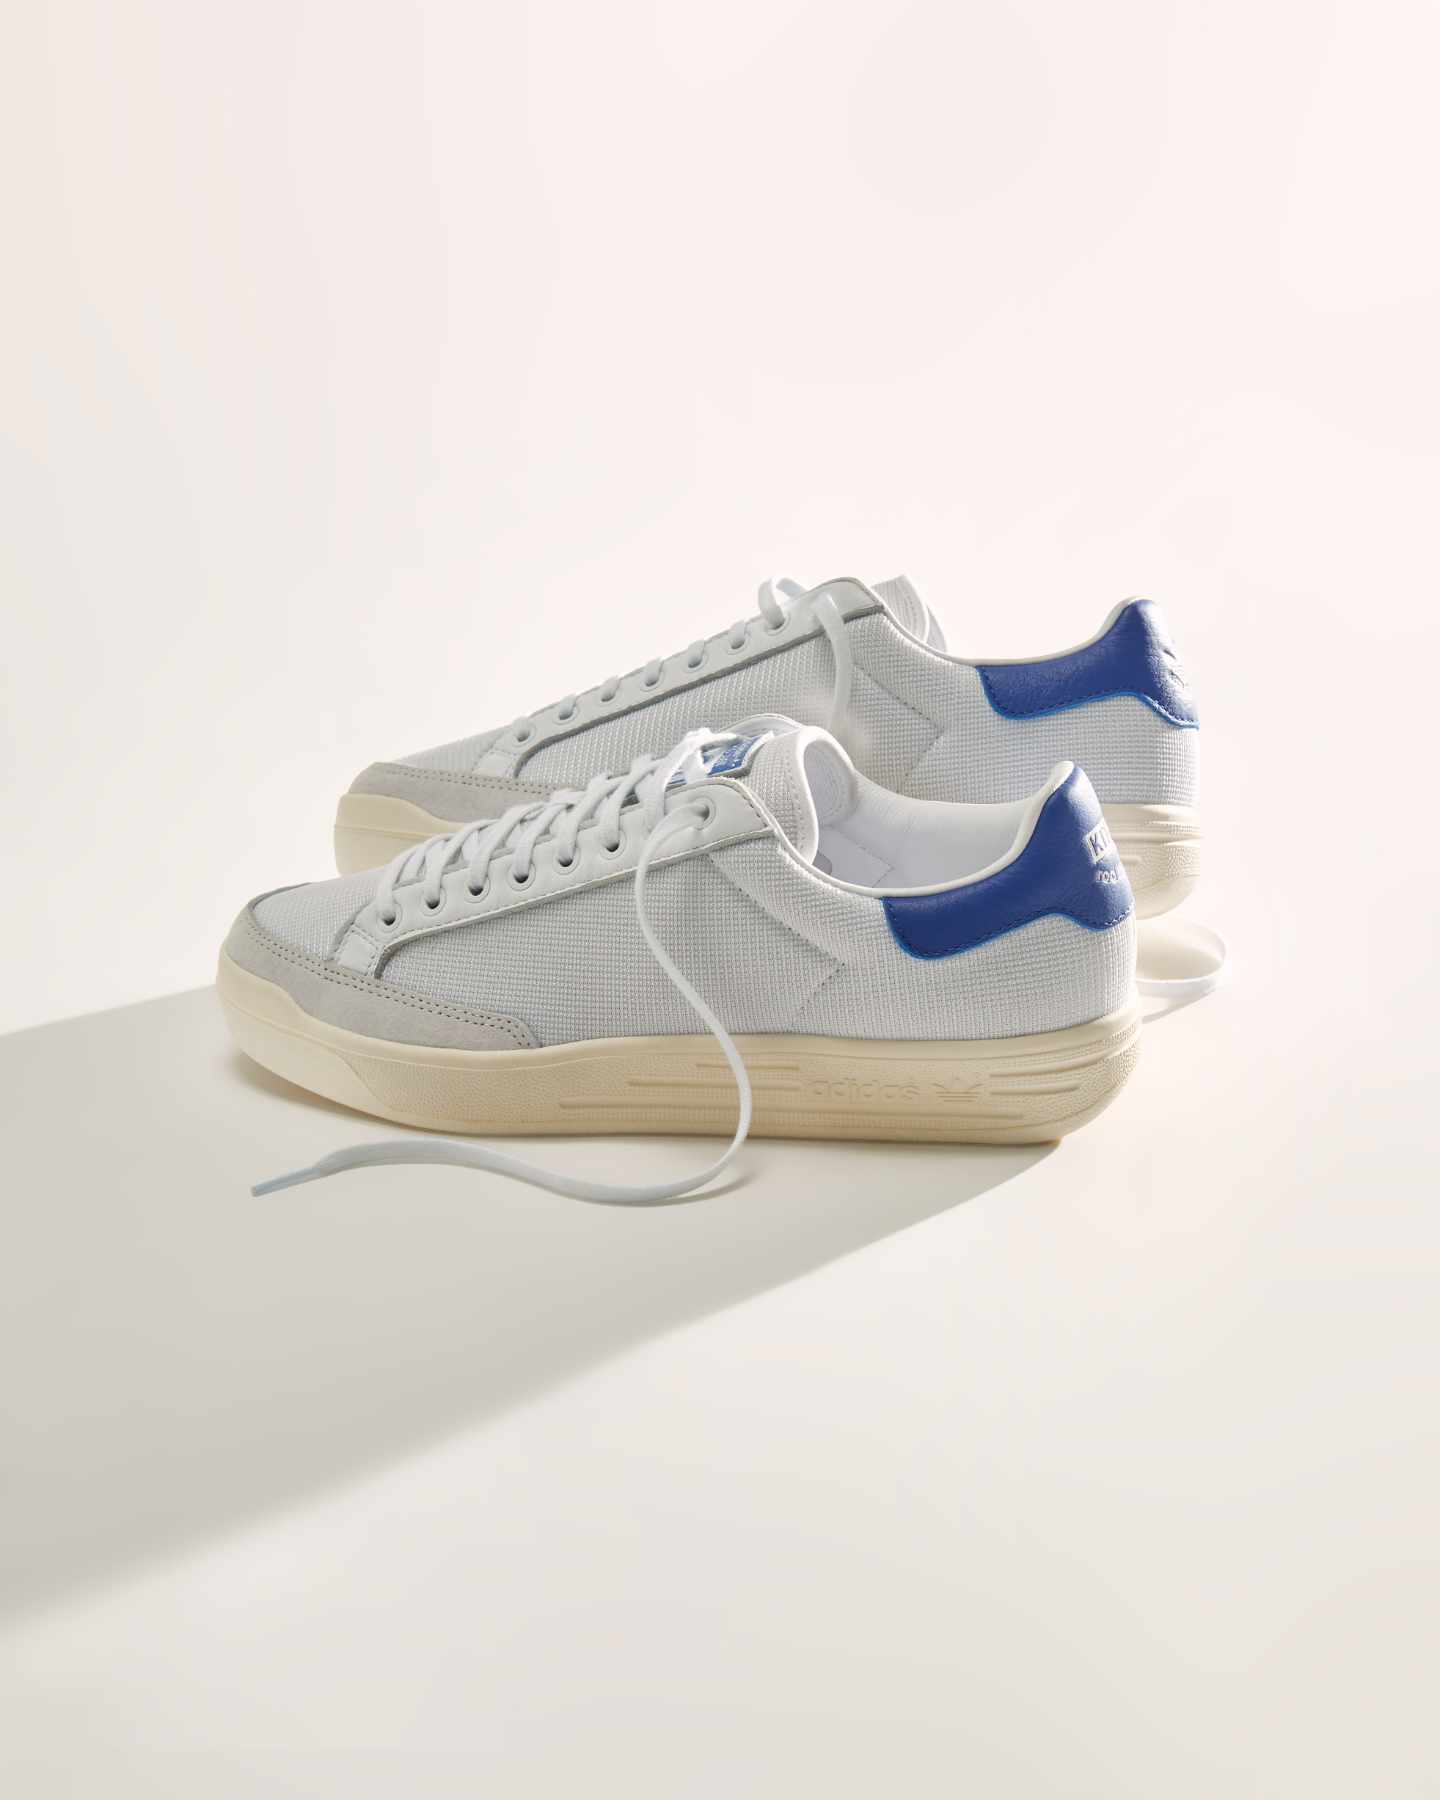 KITH & adidas' Rod Laver Fall 2023 collaboration has a release date